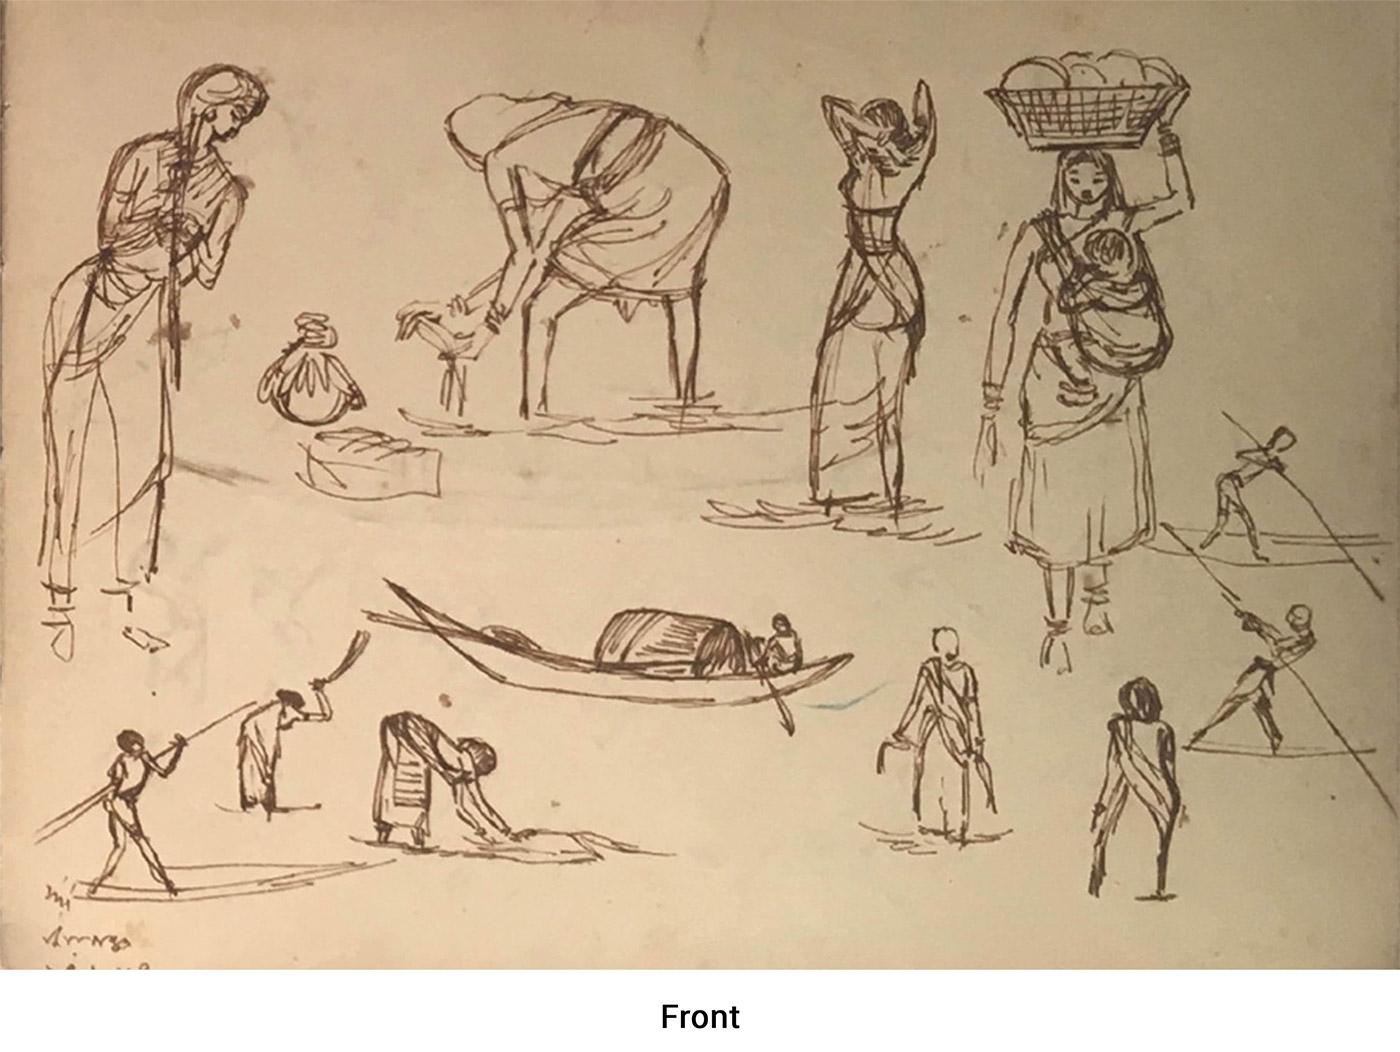 Rare work of Indian Women, River, Boat, Ink on Paper by Modern Artist 